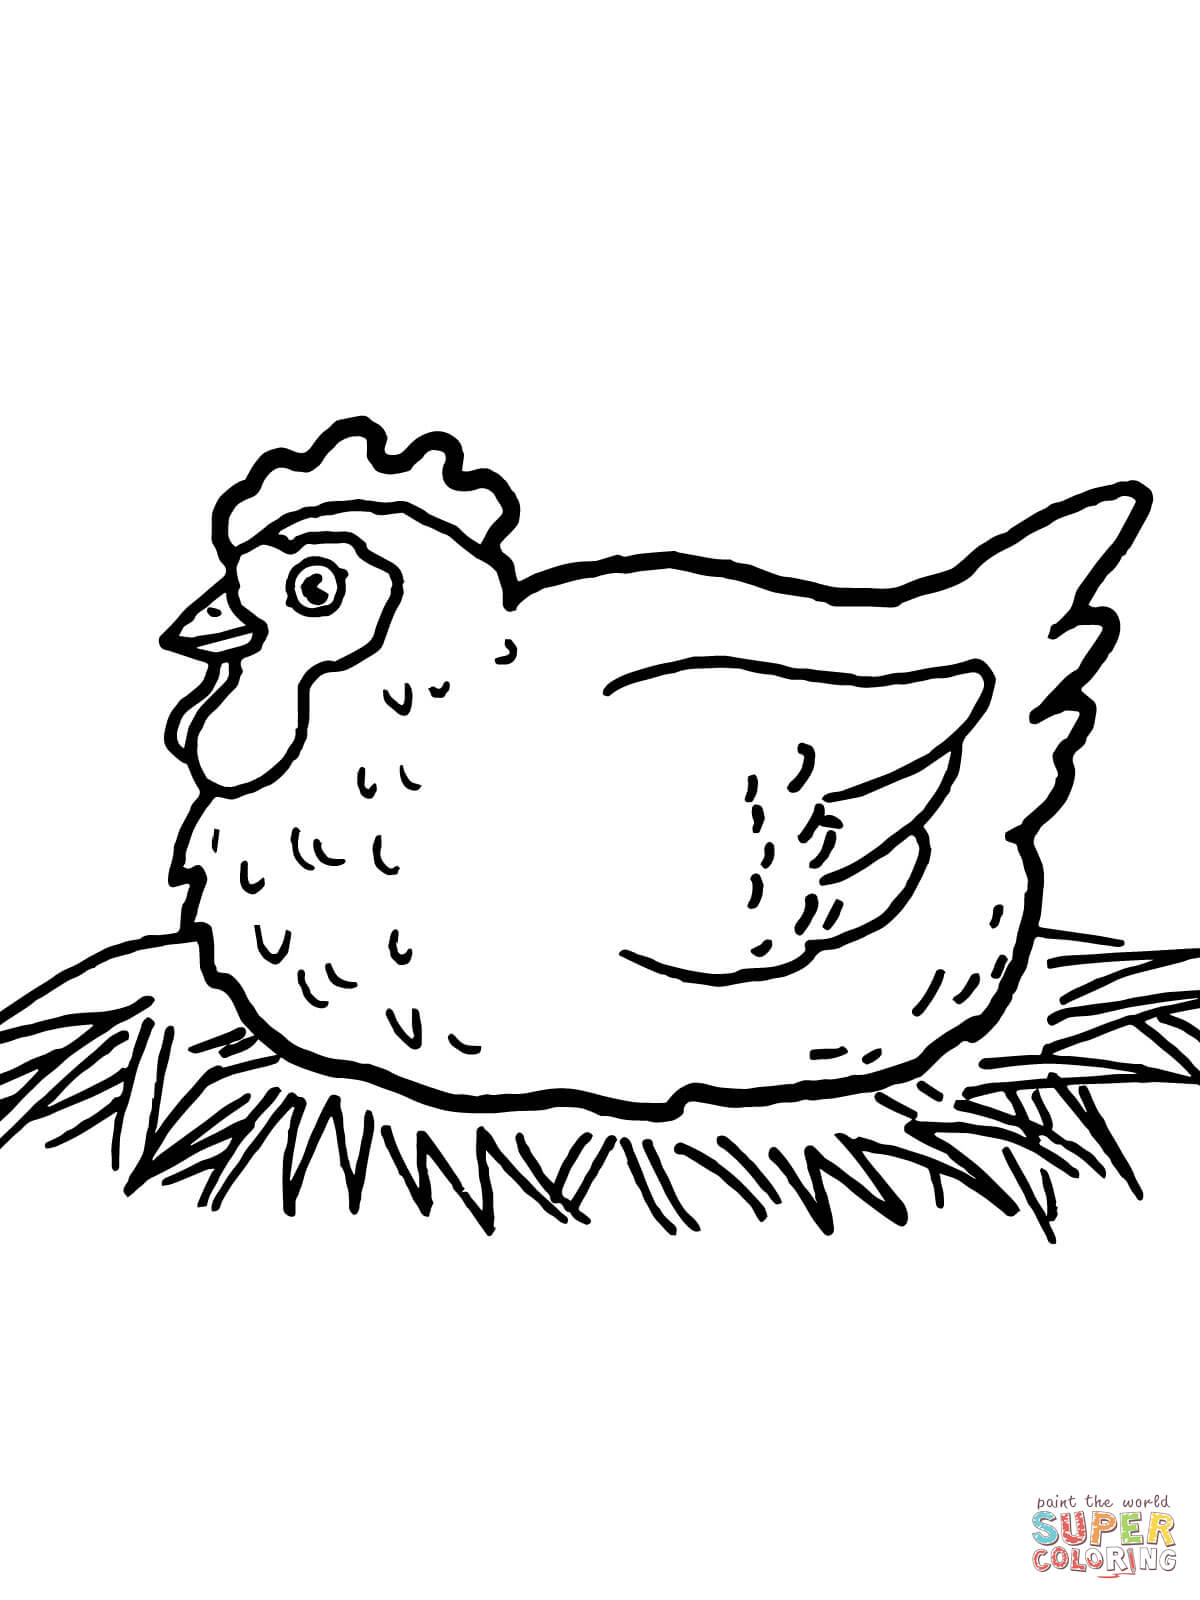 Chicken coloring #9, Download drawings